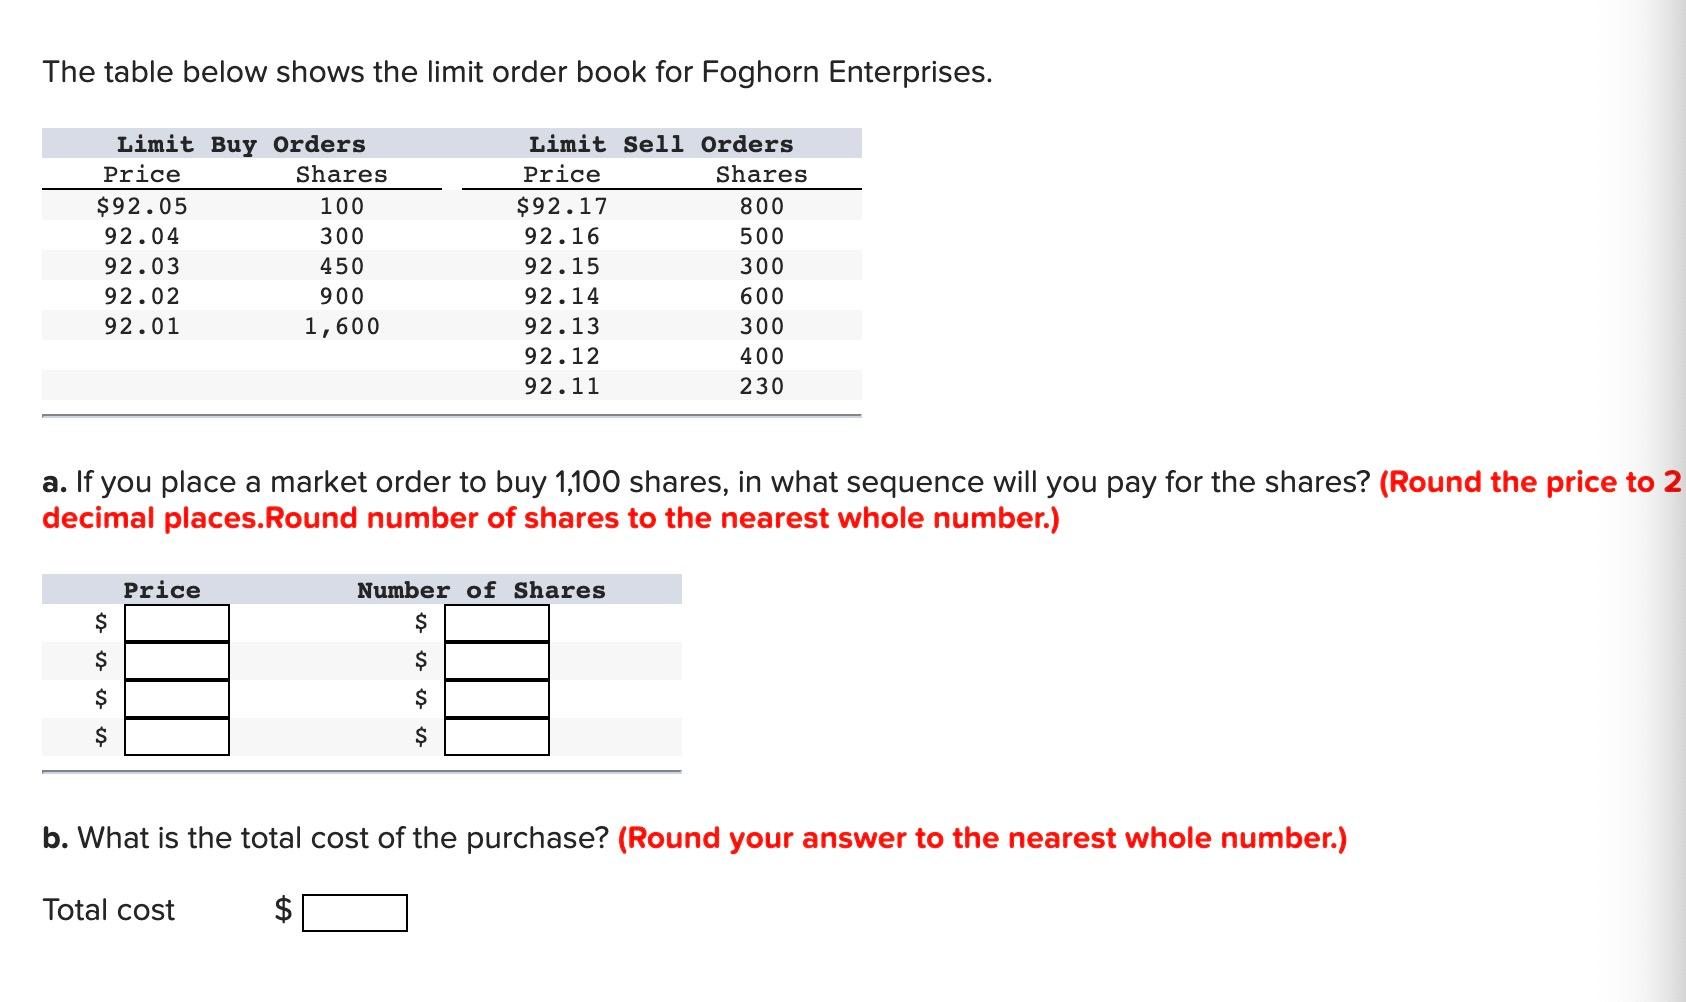 The table below shows the limit order book for Foghorn Enterprises. Limit Buy Orders Price Shares $92.05 100 92.04 300 92.03